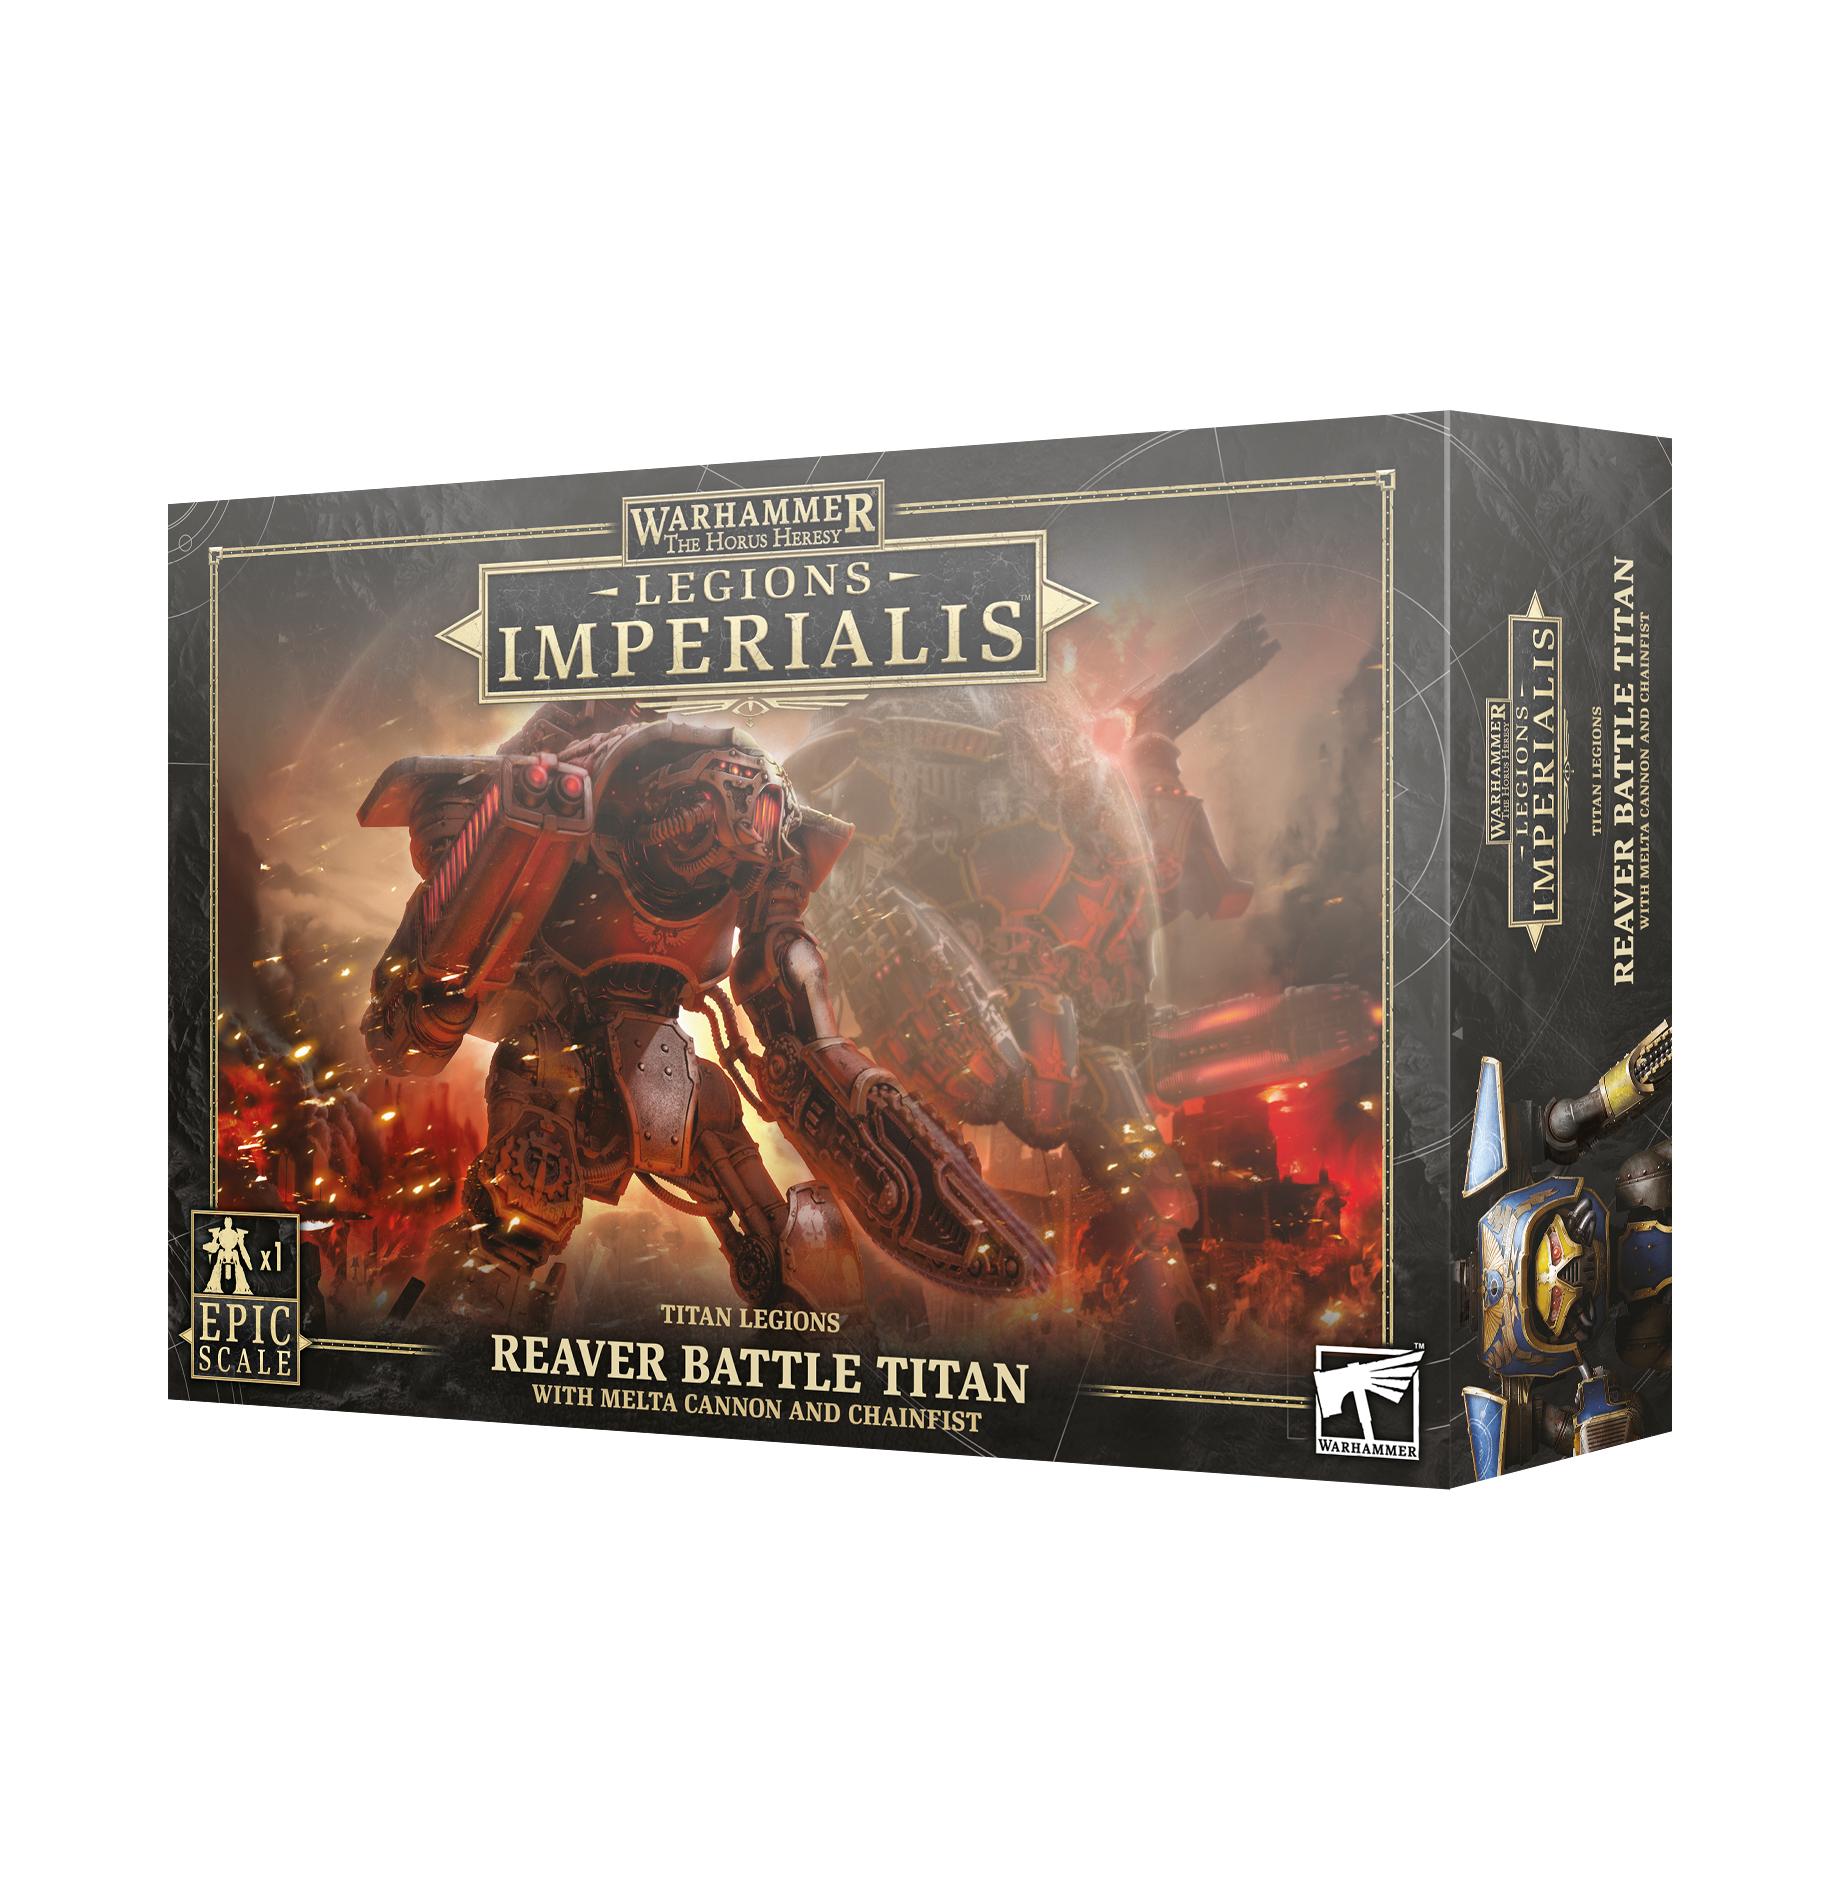 Warhammer 40,000: The Horus Heresy - Legions Imperialis: Titan Legions, Reaver Battle Titan with Melta Cannon and Chainfist